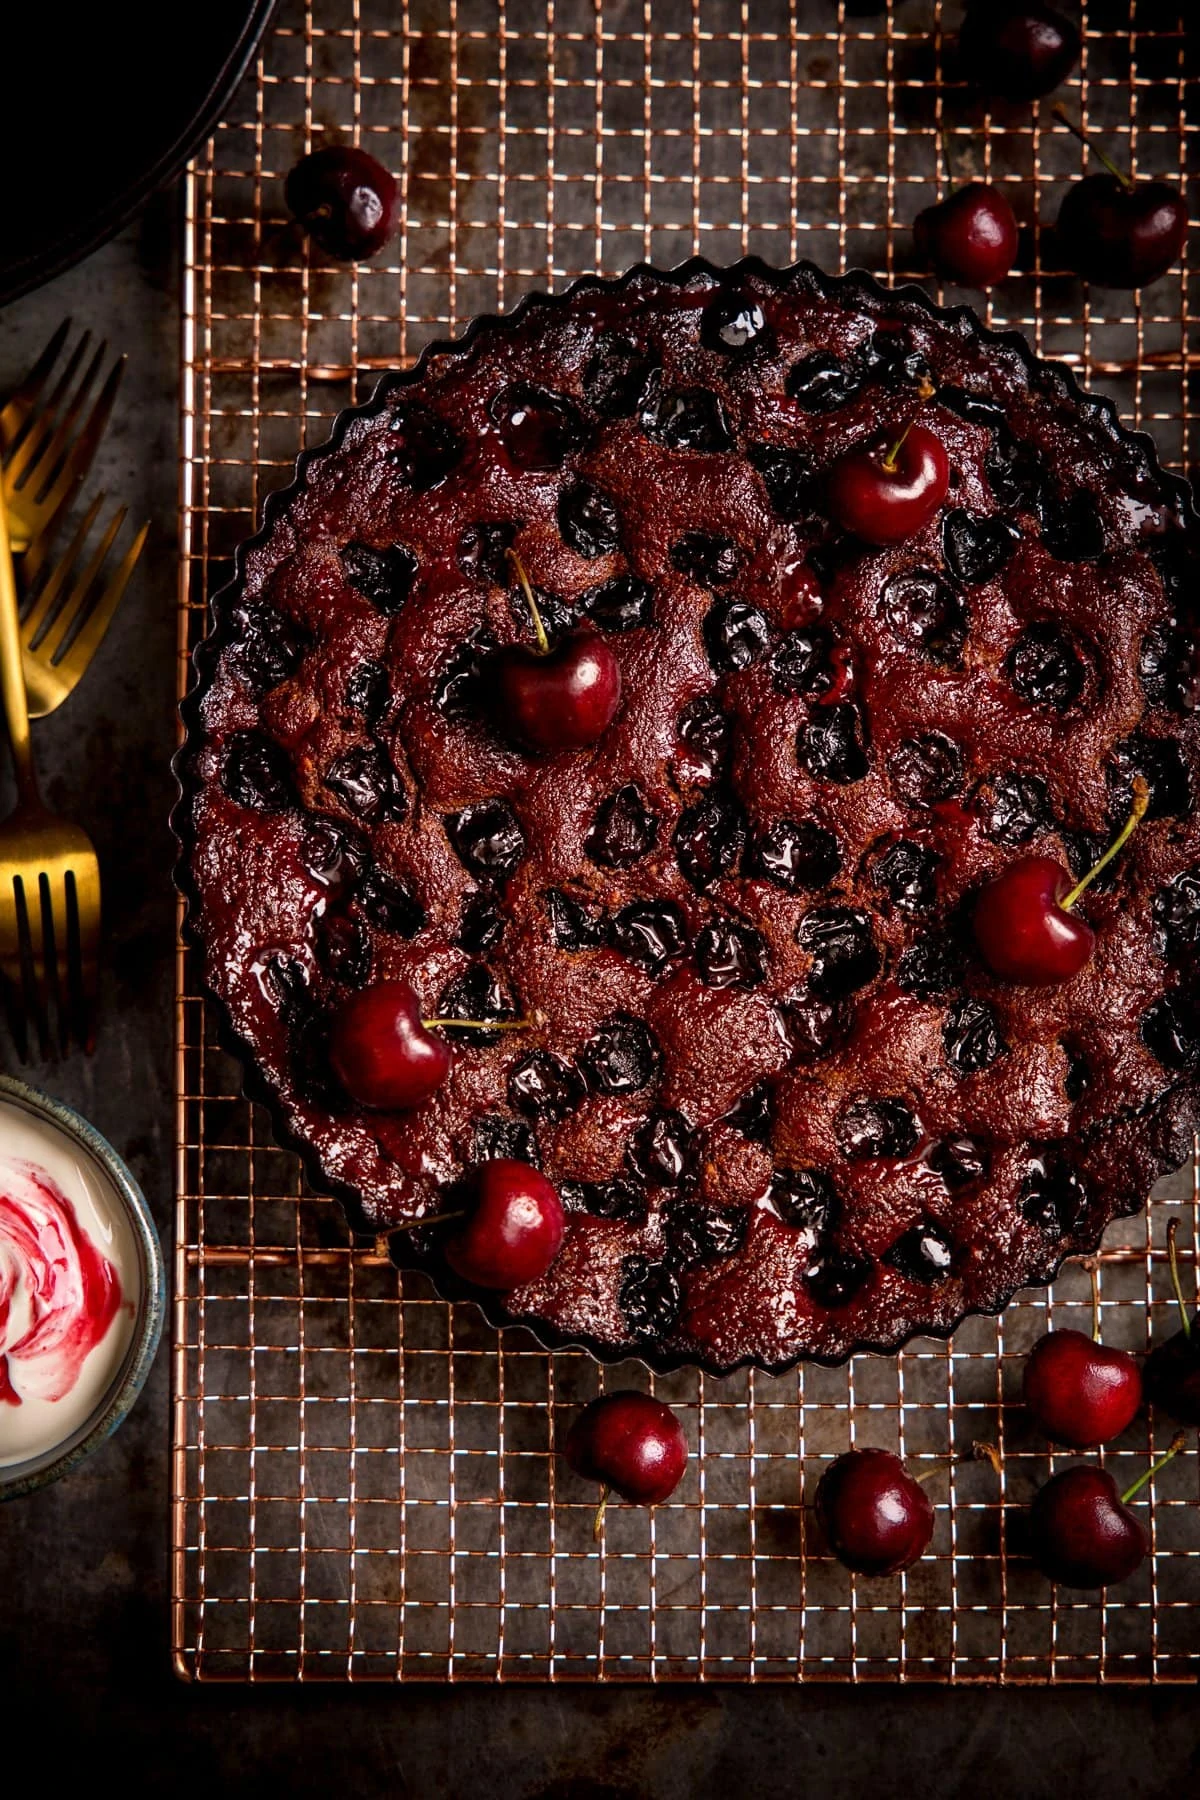 Overhead image of Chocolate Cherry Cake on a wire rack with cherries scattered around.